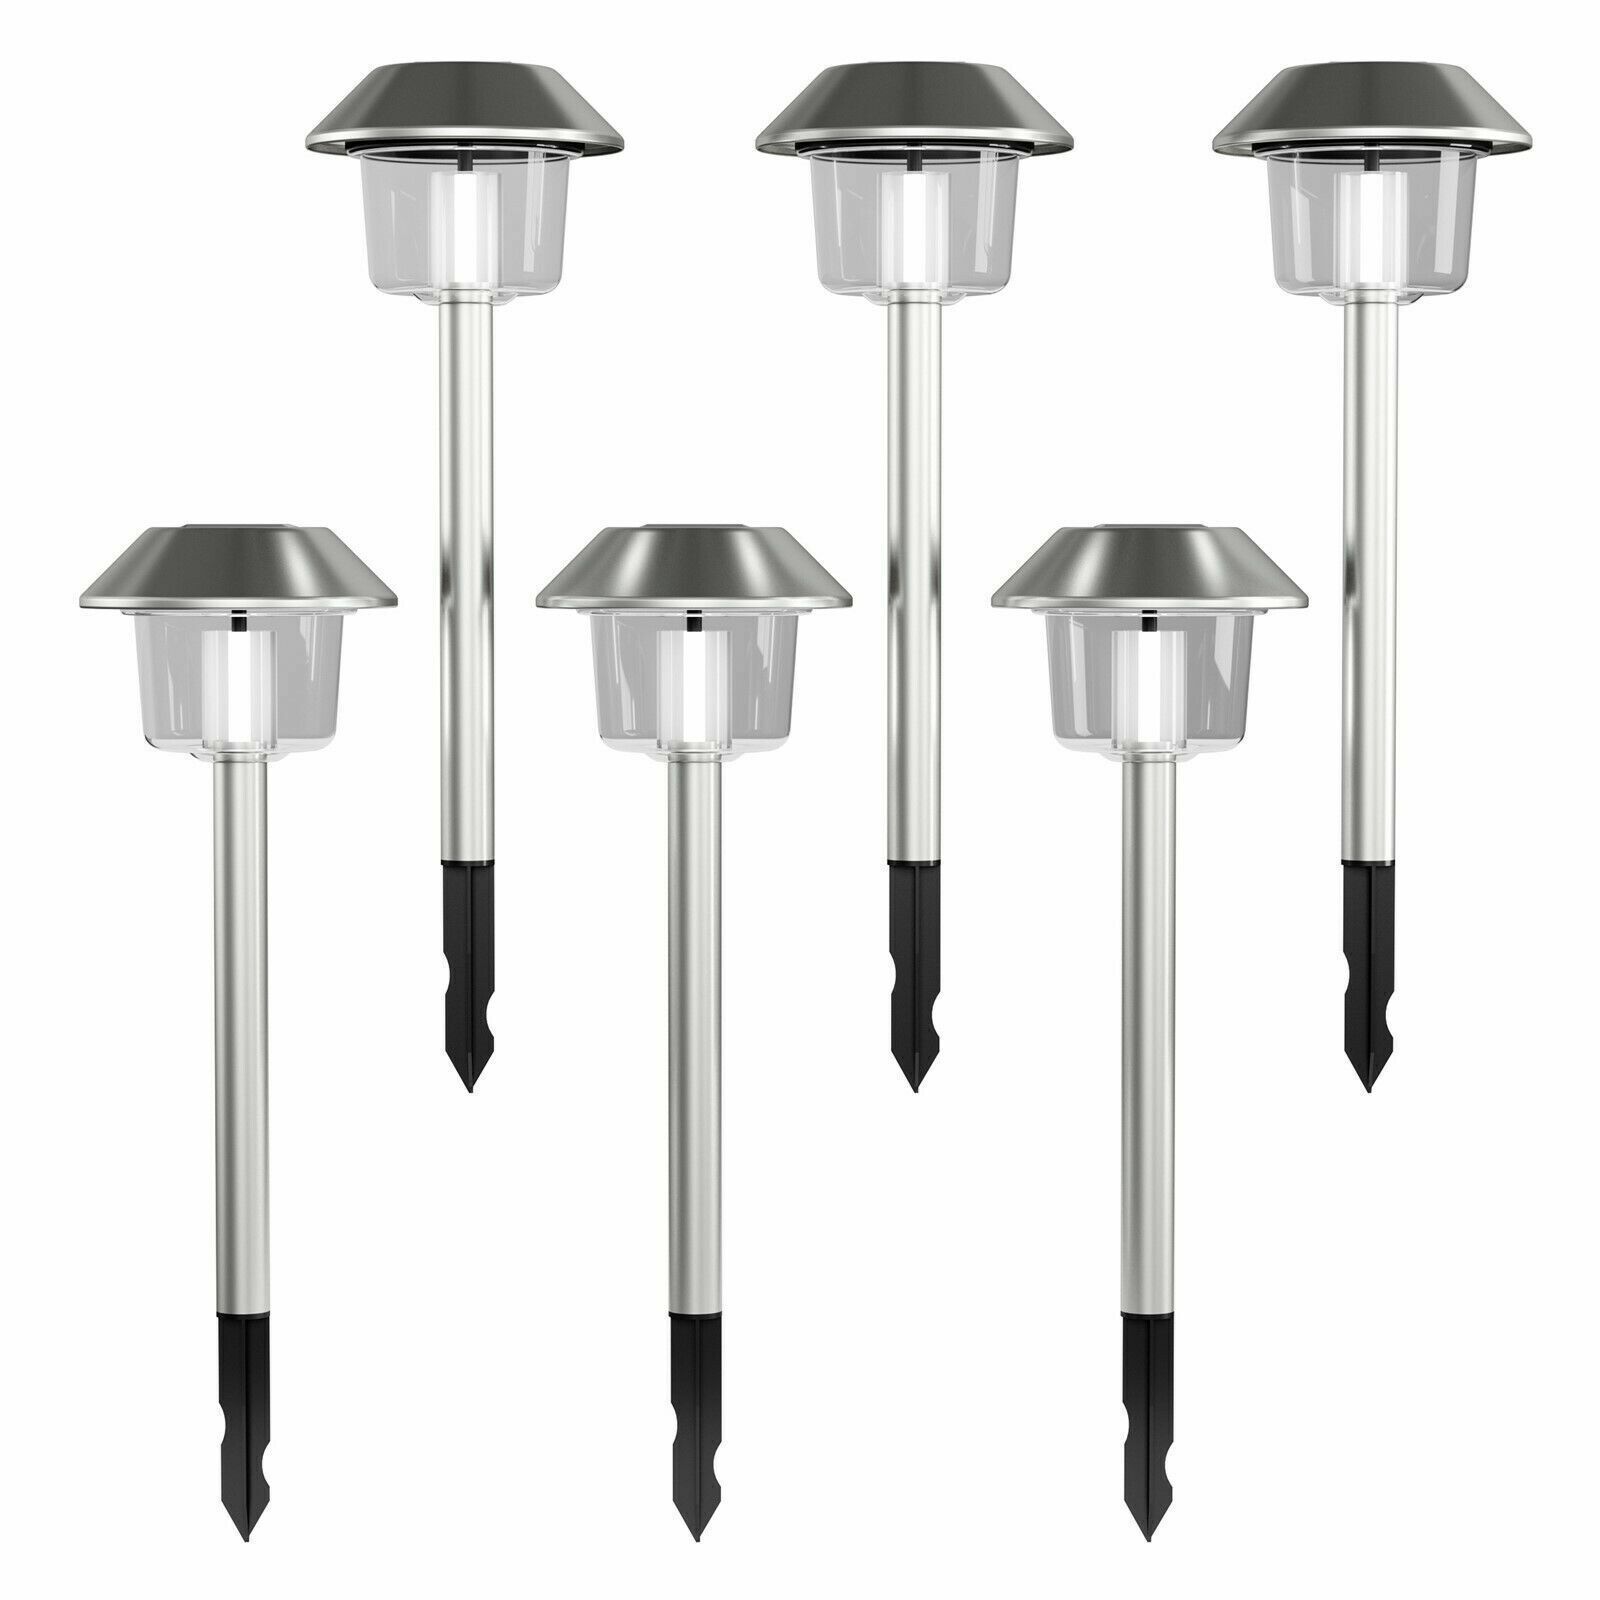 Primary image for Solar Path Lights Set of 6 Stainless Steel Outdoor Flower Bed Lighting 17 Inch